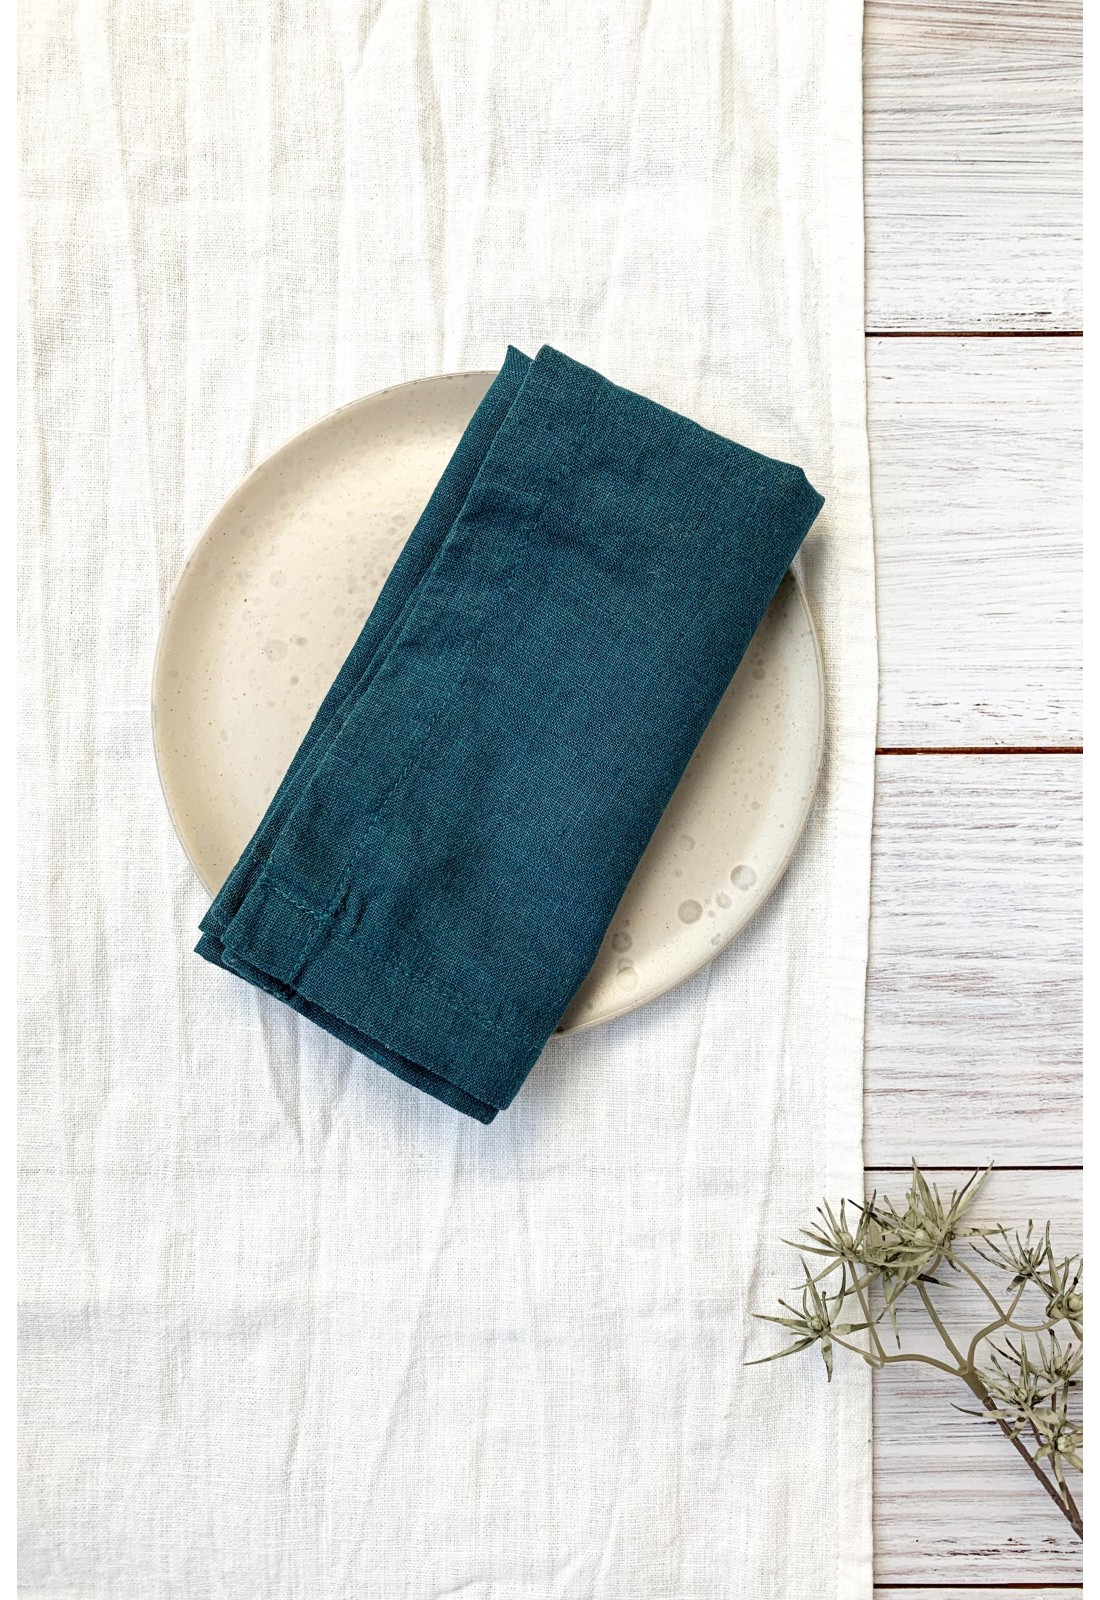 https://www.touchablelinen.com/image/cache/catalog/products/22/Linen-napkins-All-colors-and-sizes-8-1100x1600.jpg